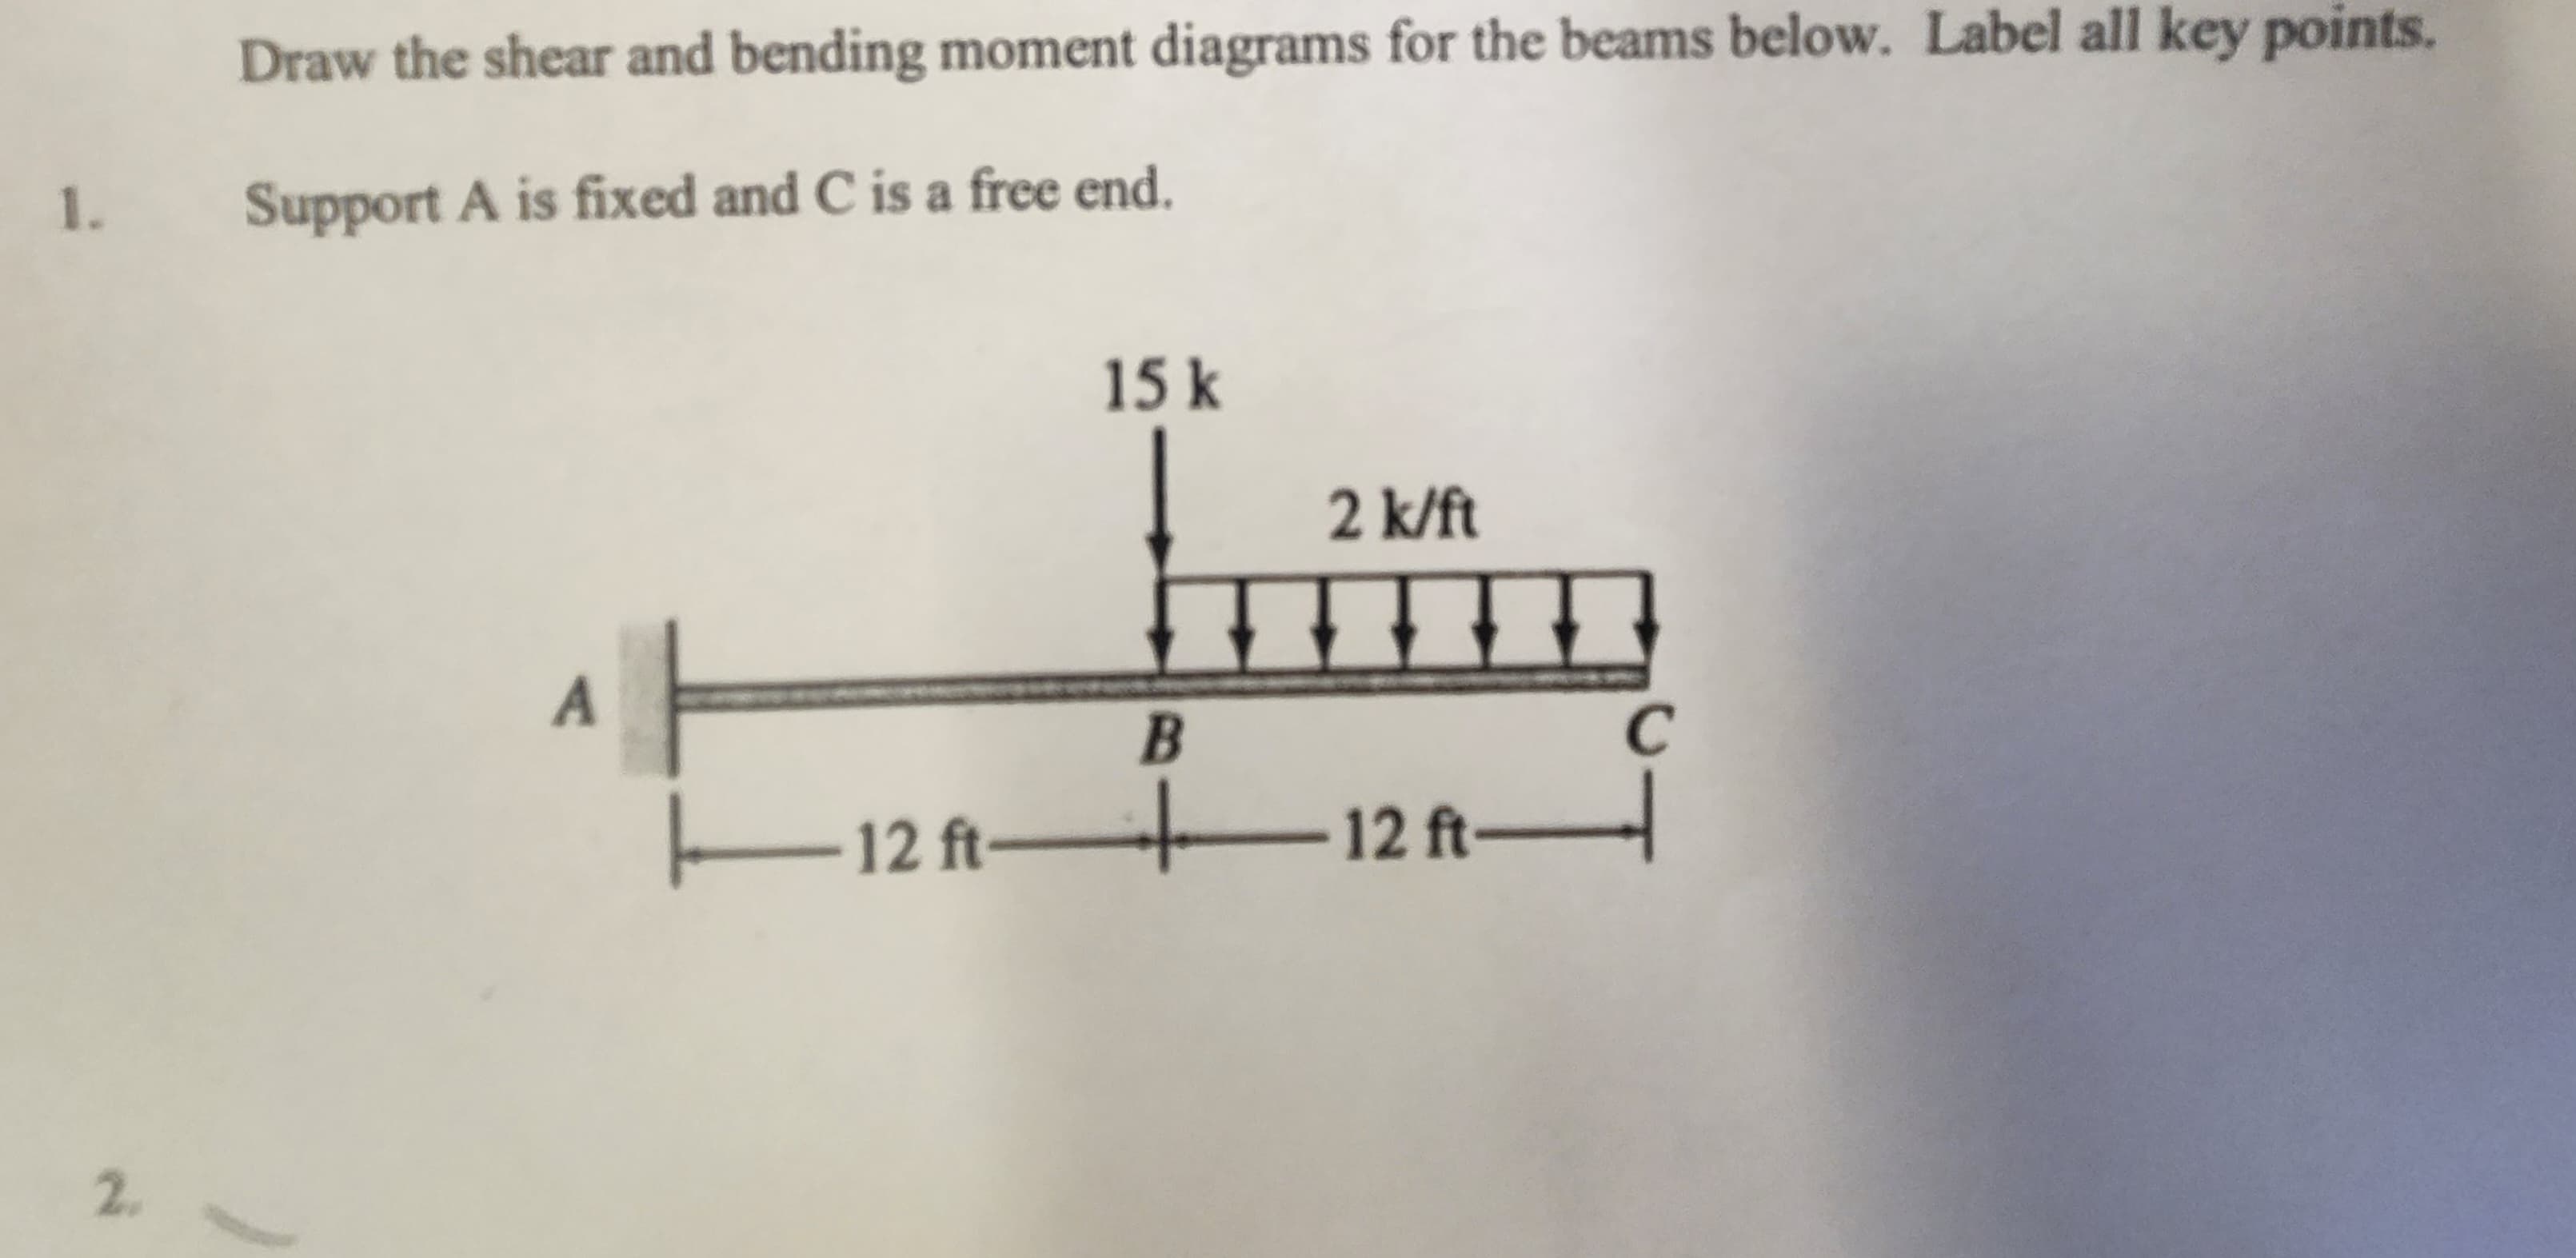 Draw the shear and bending moment diagrams for the beams below. Label all key points.
1. Support A is fixed and C is a free end.
2.
A
15 k
2 k/ft
I
B
12 ft—12 ft
C